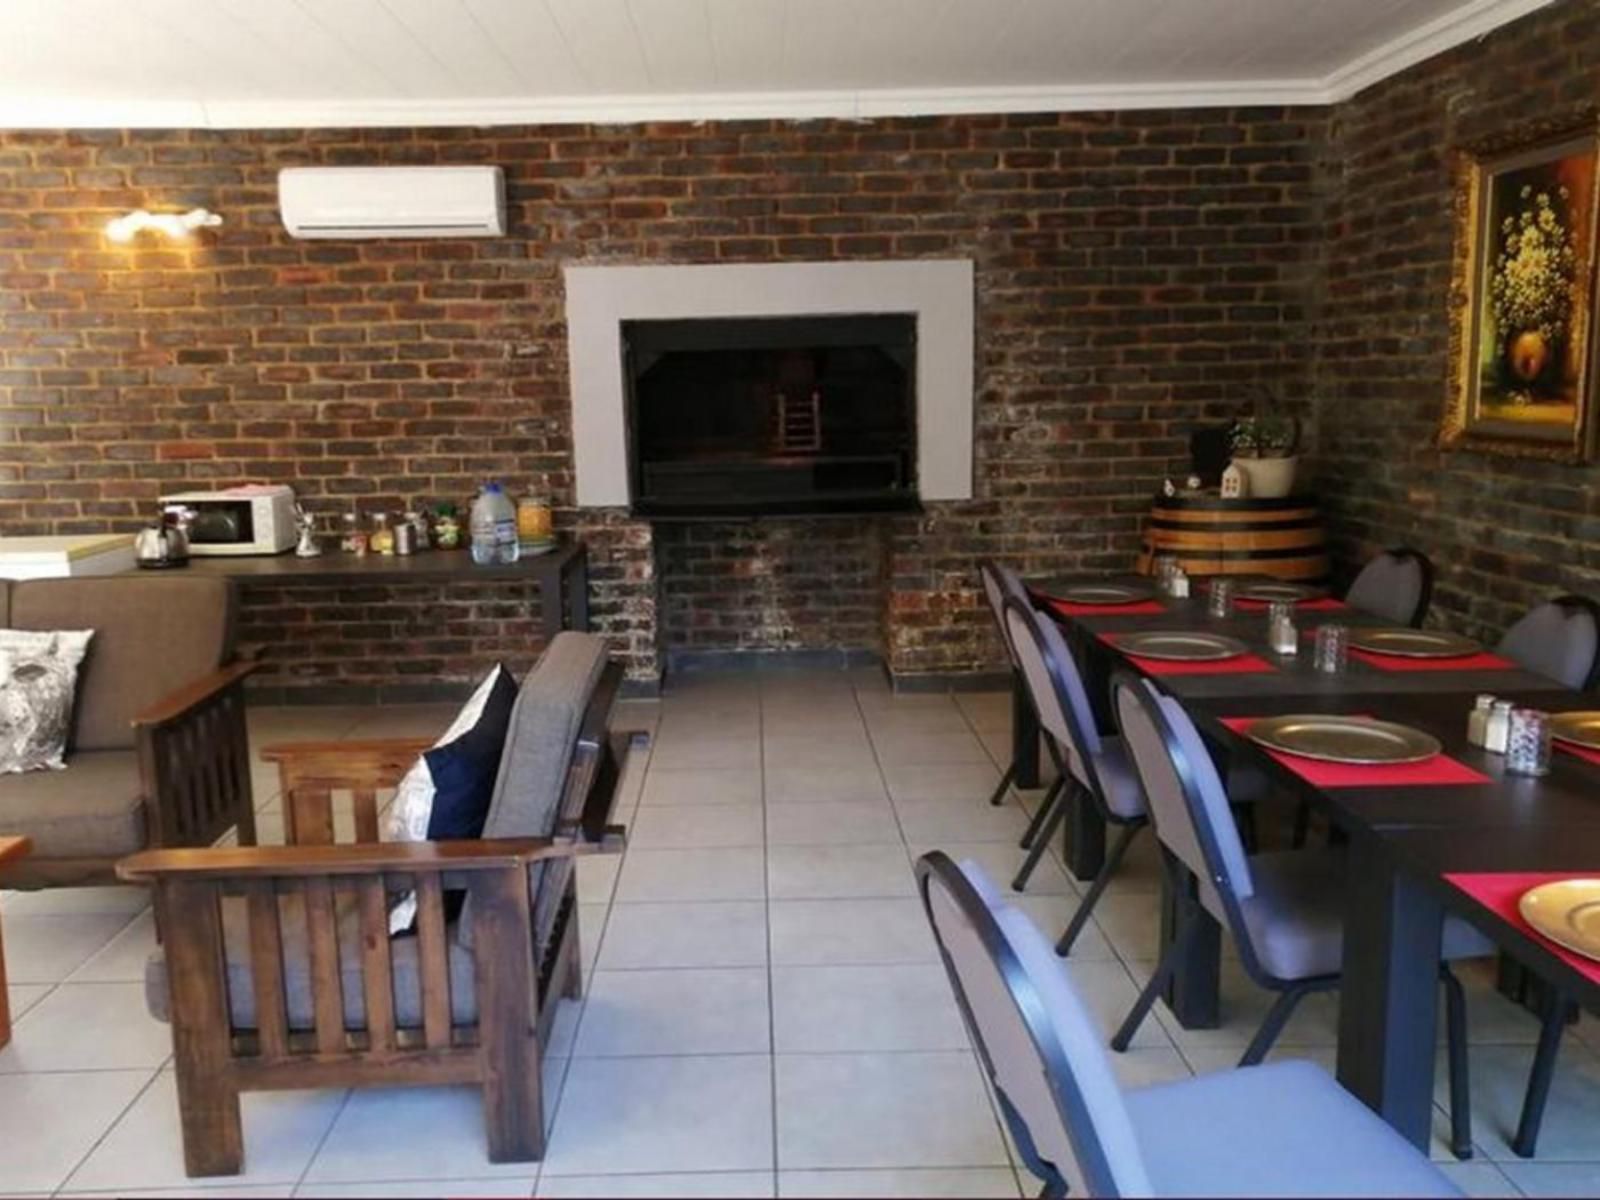 Wildebeespan Bed And Breakfast Delareyville North West Province South Africa Fireplace